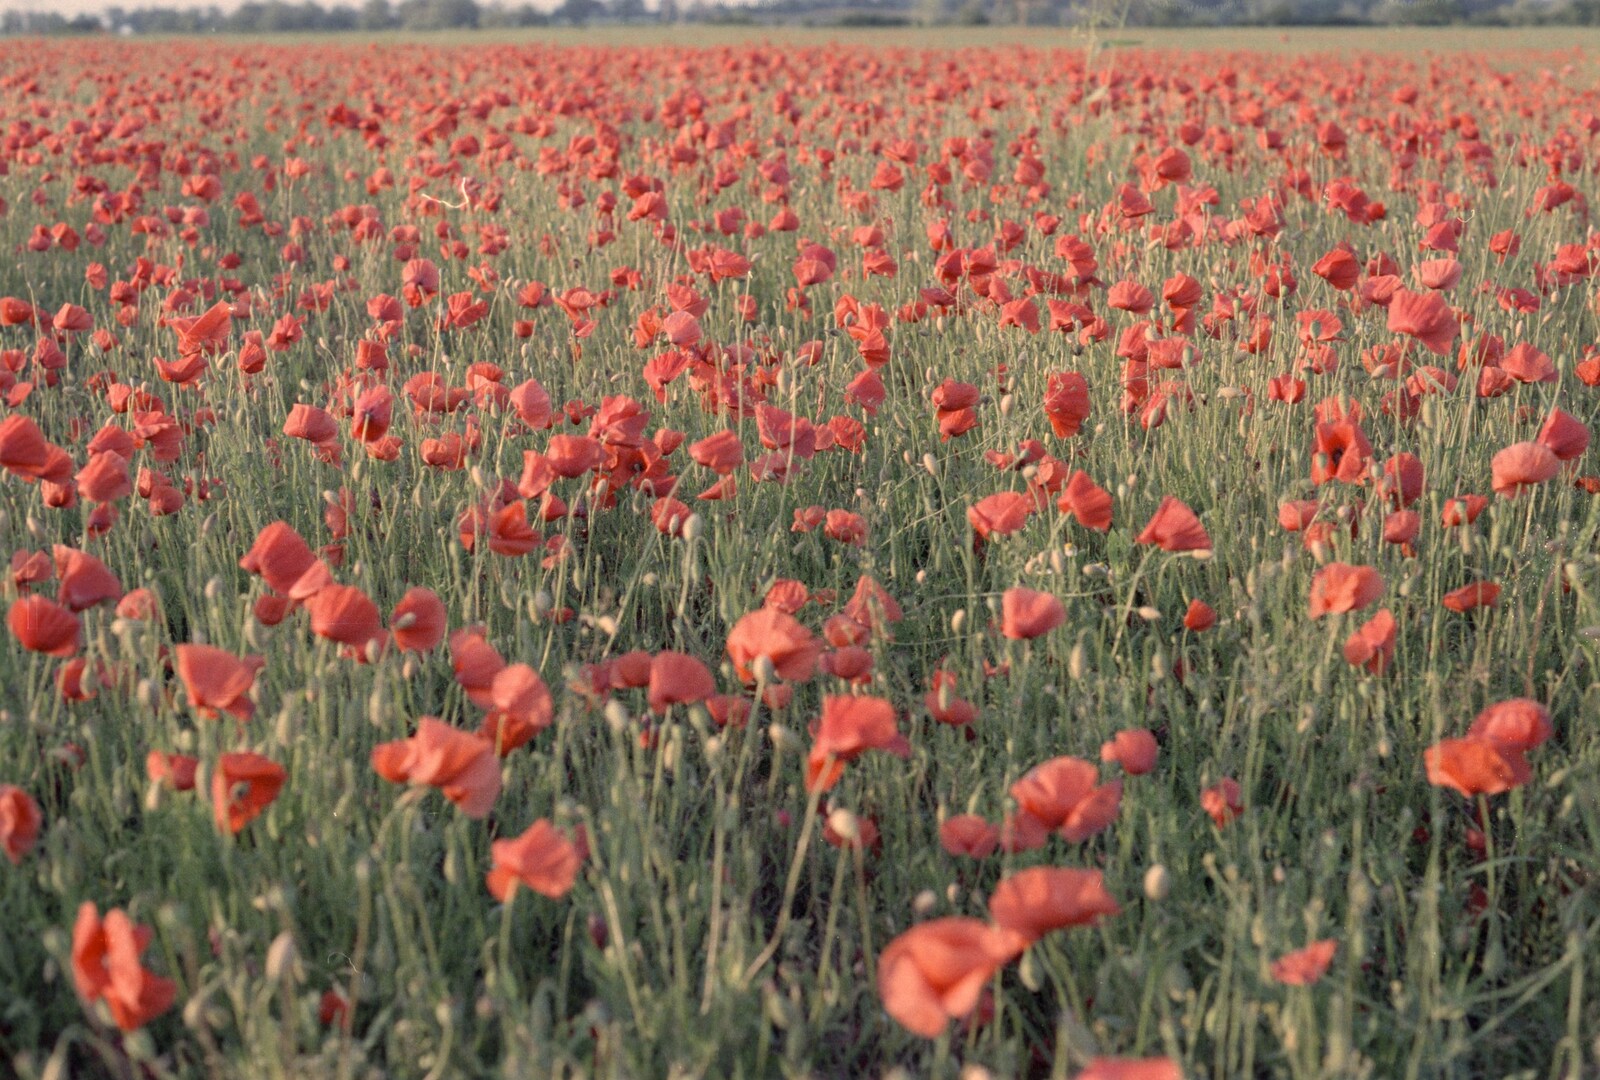 A field of poppies from Orford With Riki and Dave, Poppies and an Alfie Afternoon, Suffolk - 6th August 1994